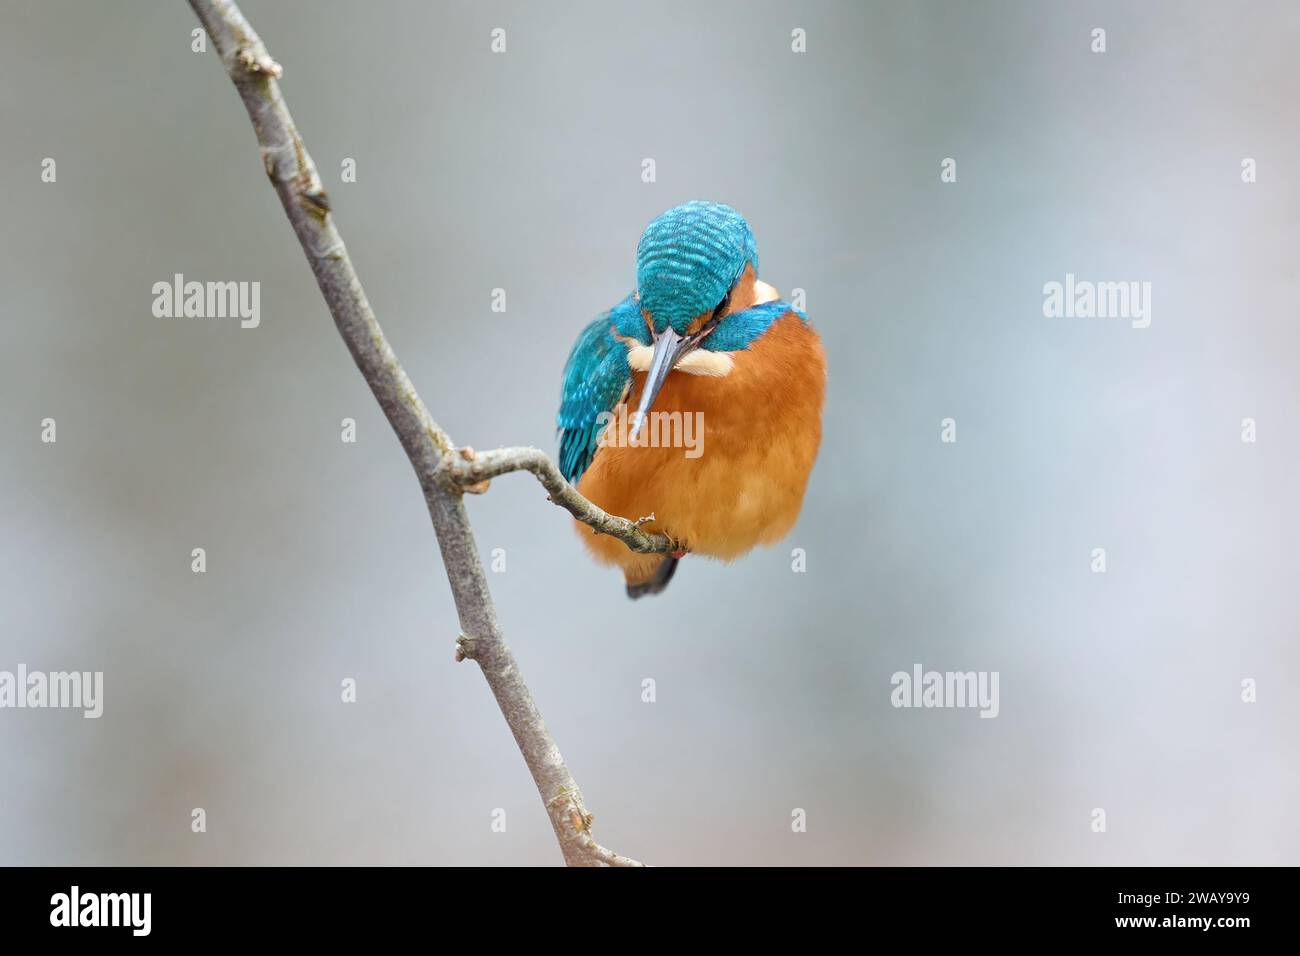 Common kingfisher (Alcedo atthis) in its natural environment Stock Photo